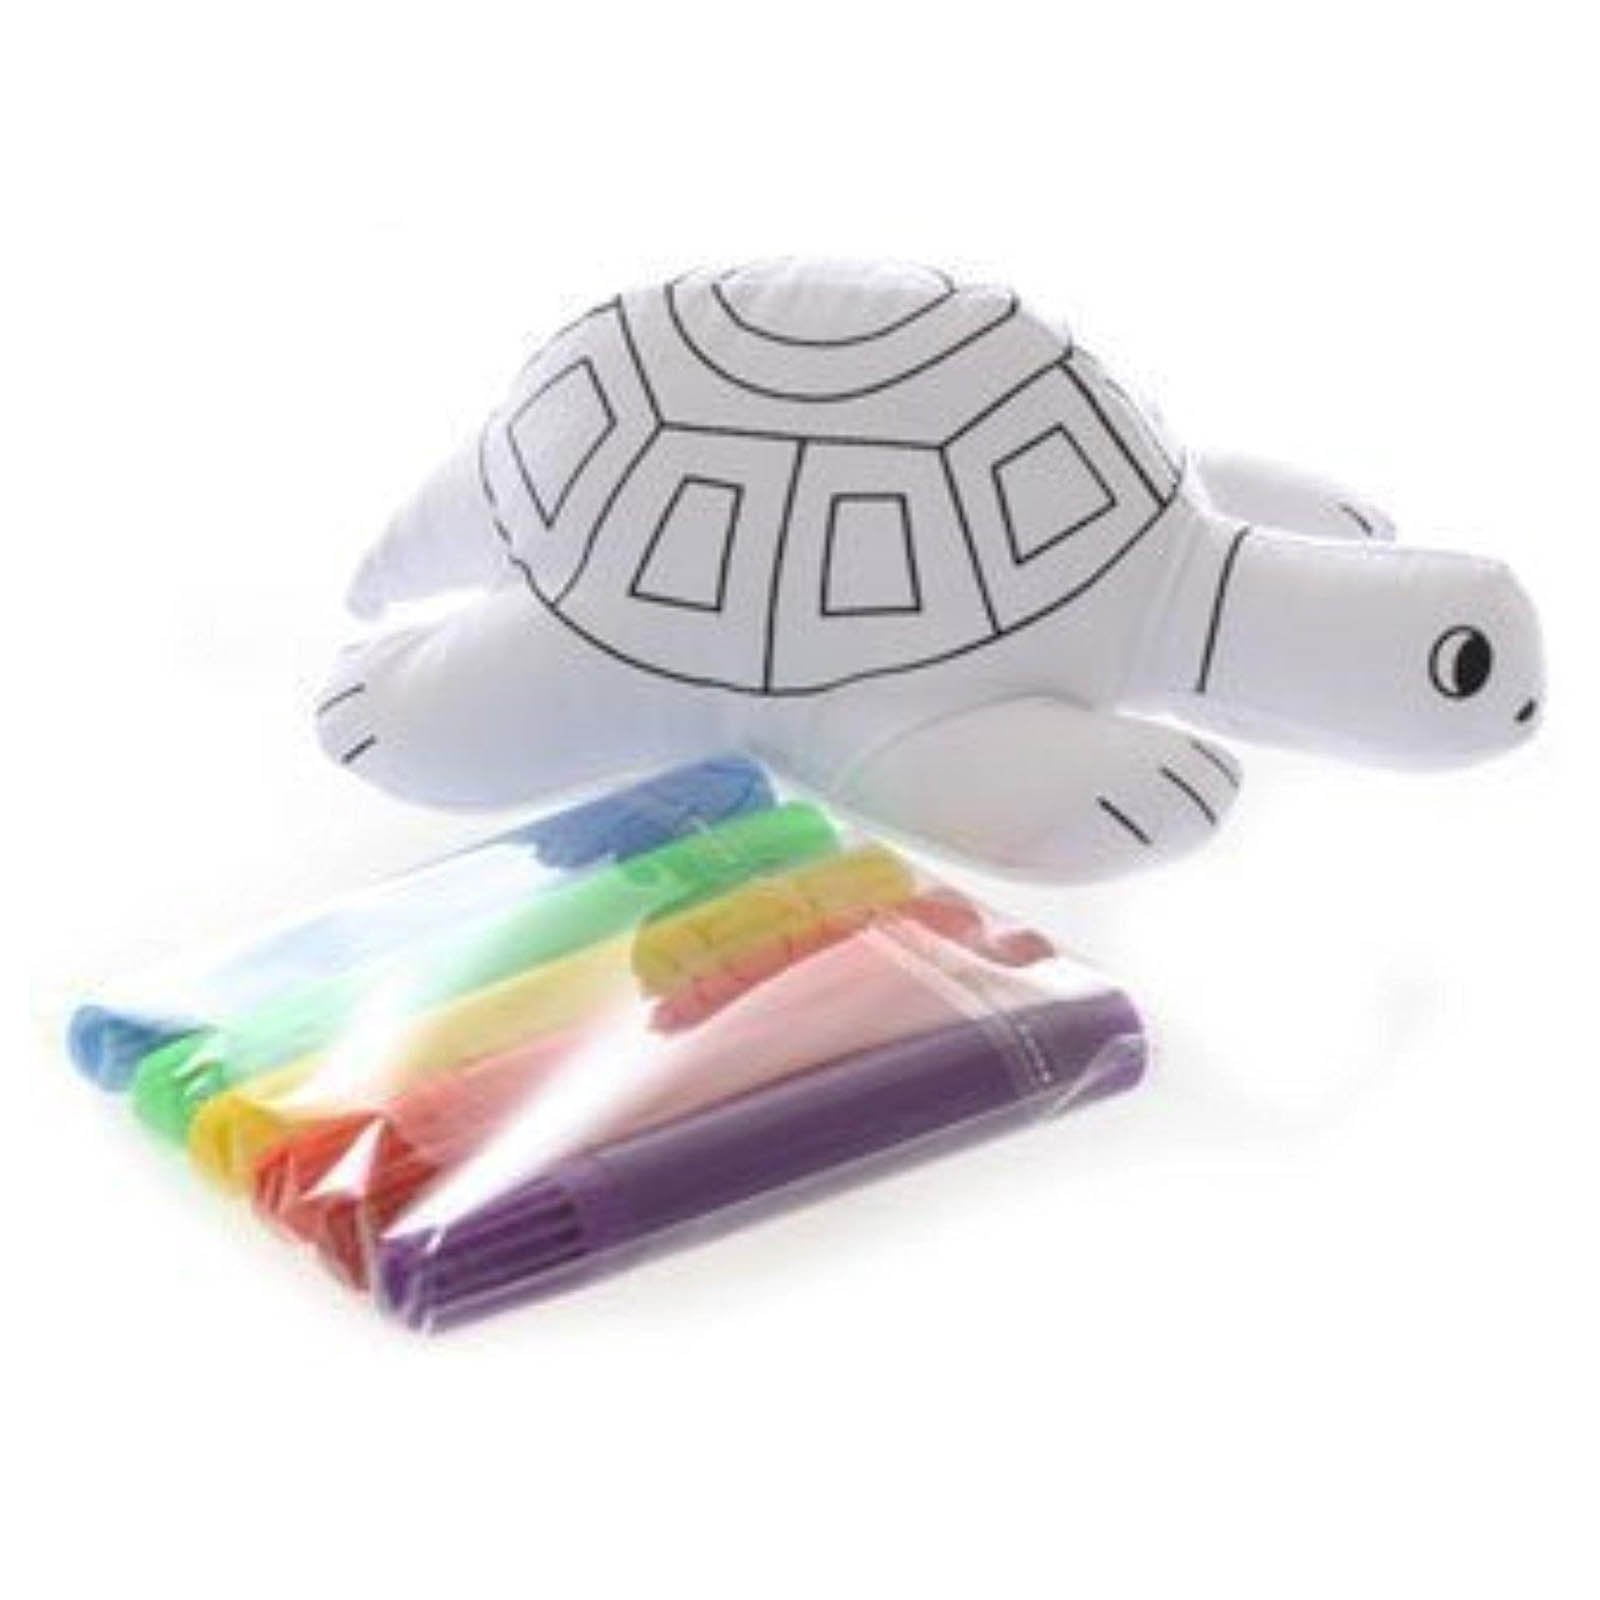 Ganz Fish 6 Inch Plush Mini Coloring Kit NEW Toys Cute Do It Yourself 